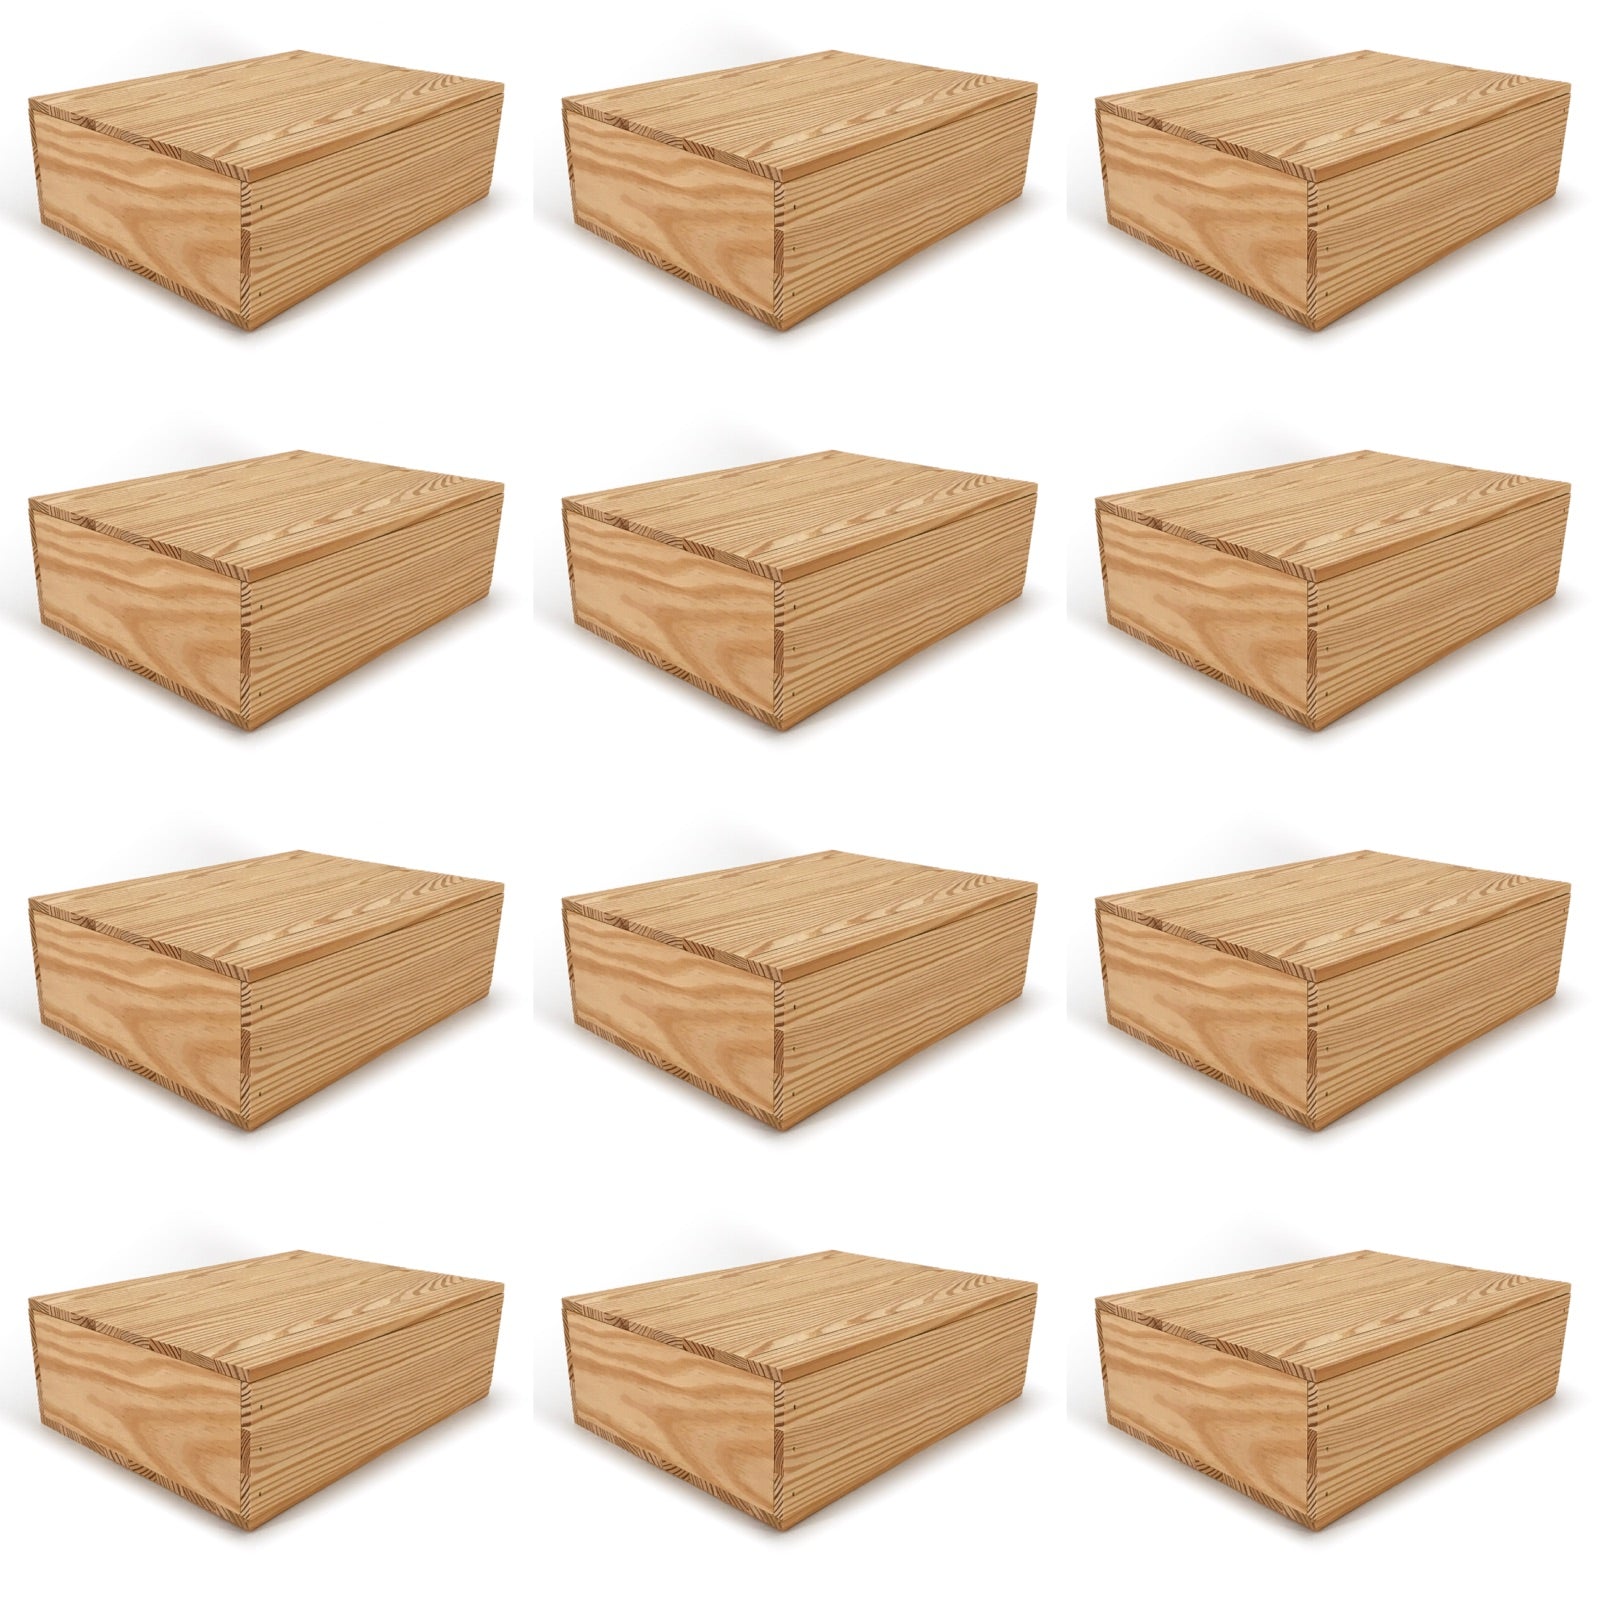 12 Small wooden crates with lid 14x10x4.25